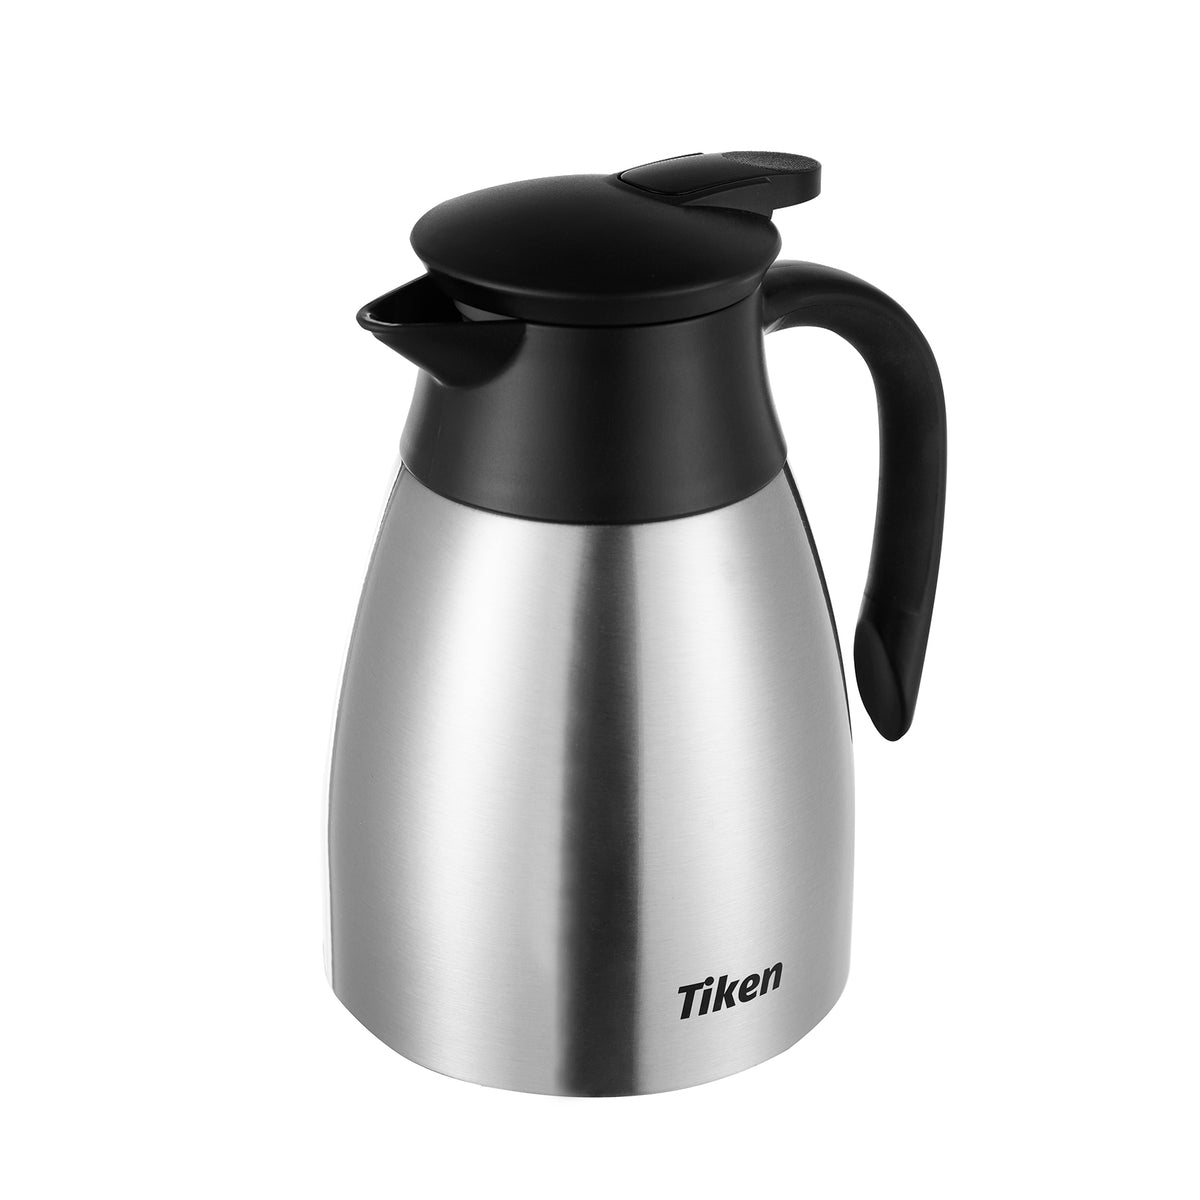 Tiken 34 Oz Thermal Coffee Carafe, Stainless Steel Insulated